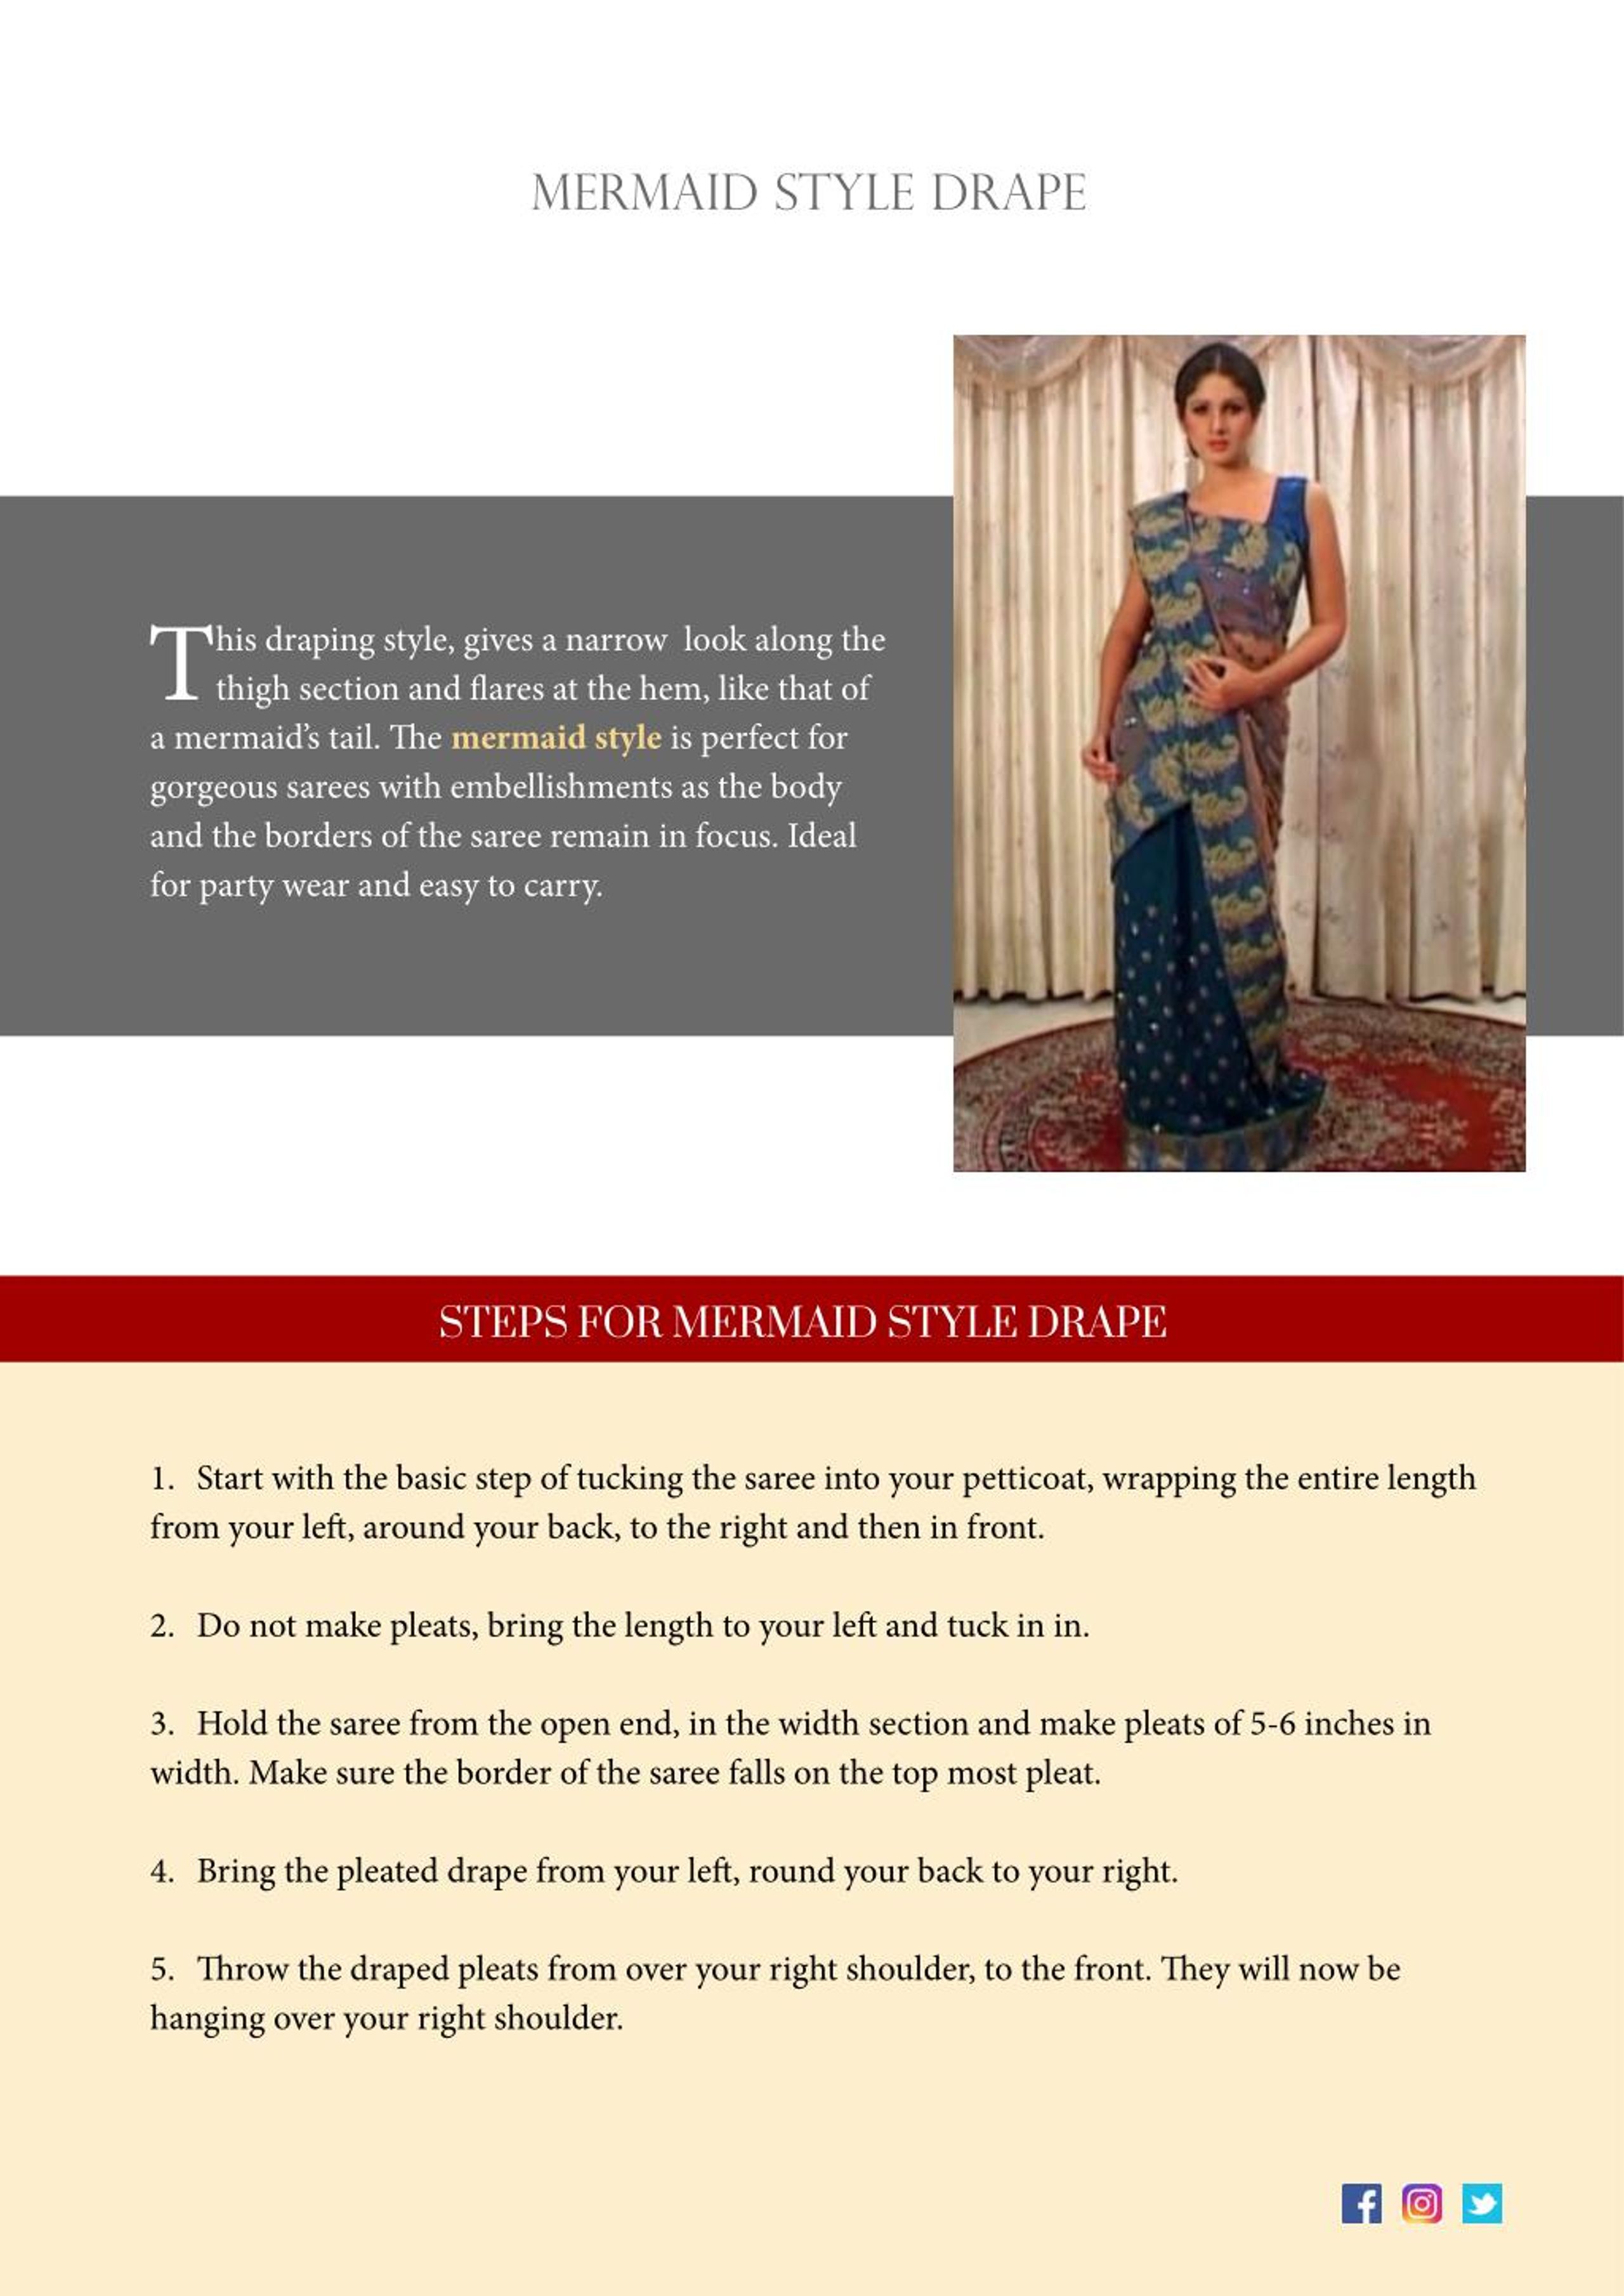 PPT - Know About Different Styles of Wearing Saree - Saree Draping ...